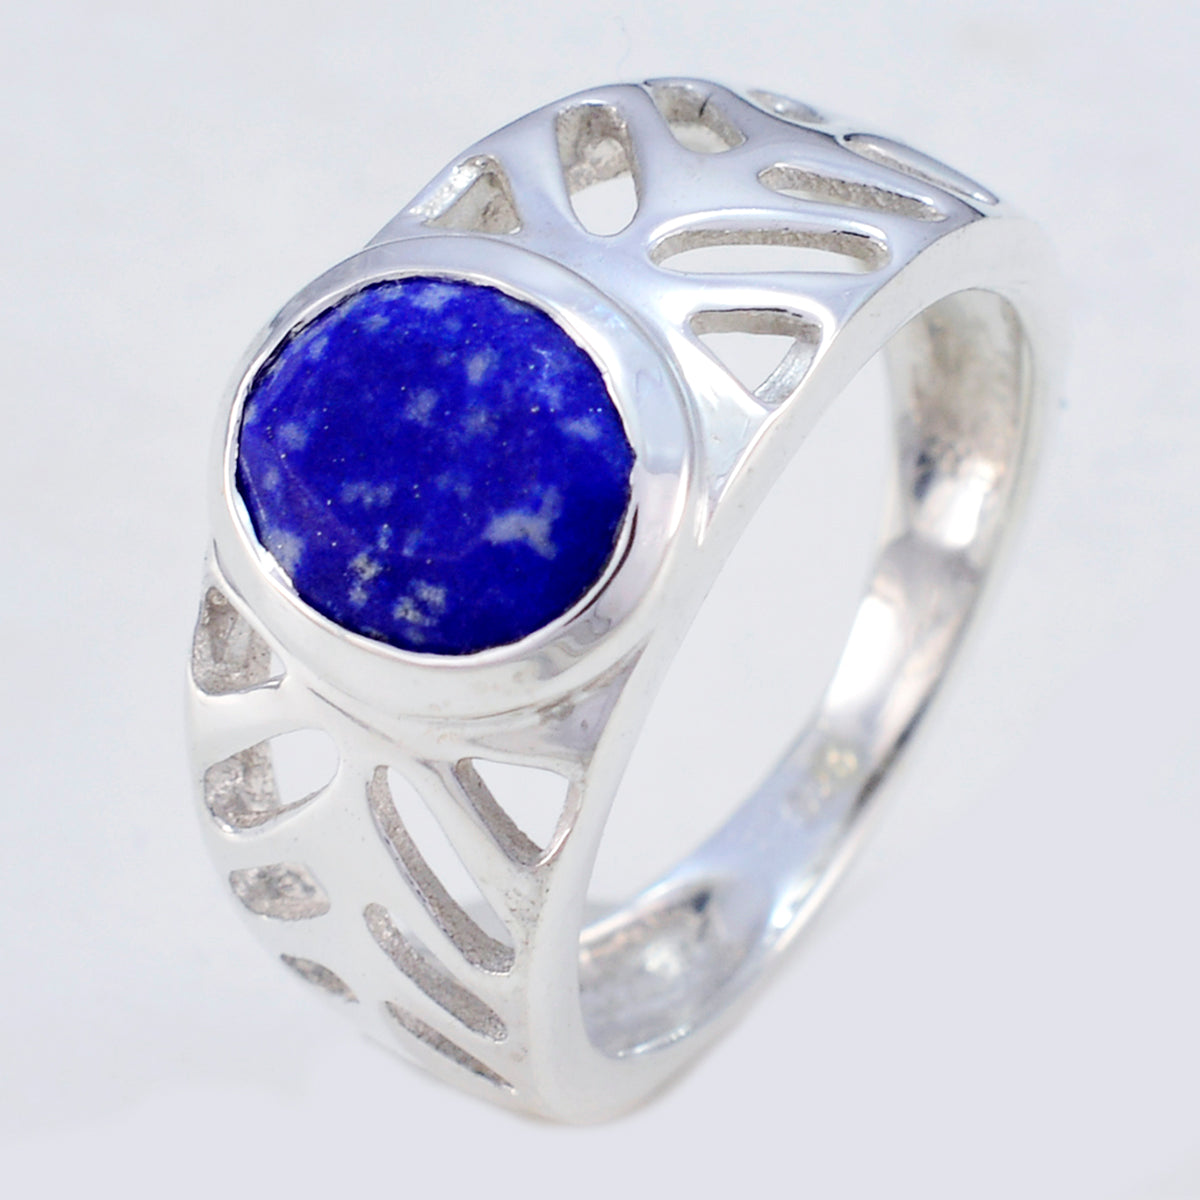 Wholesales Gem Lapis Lazuli Solid Silver Ring Selling Gold Jewelry